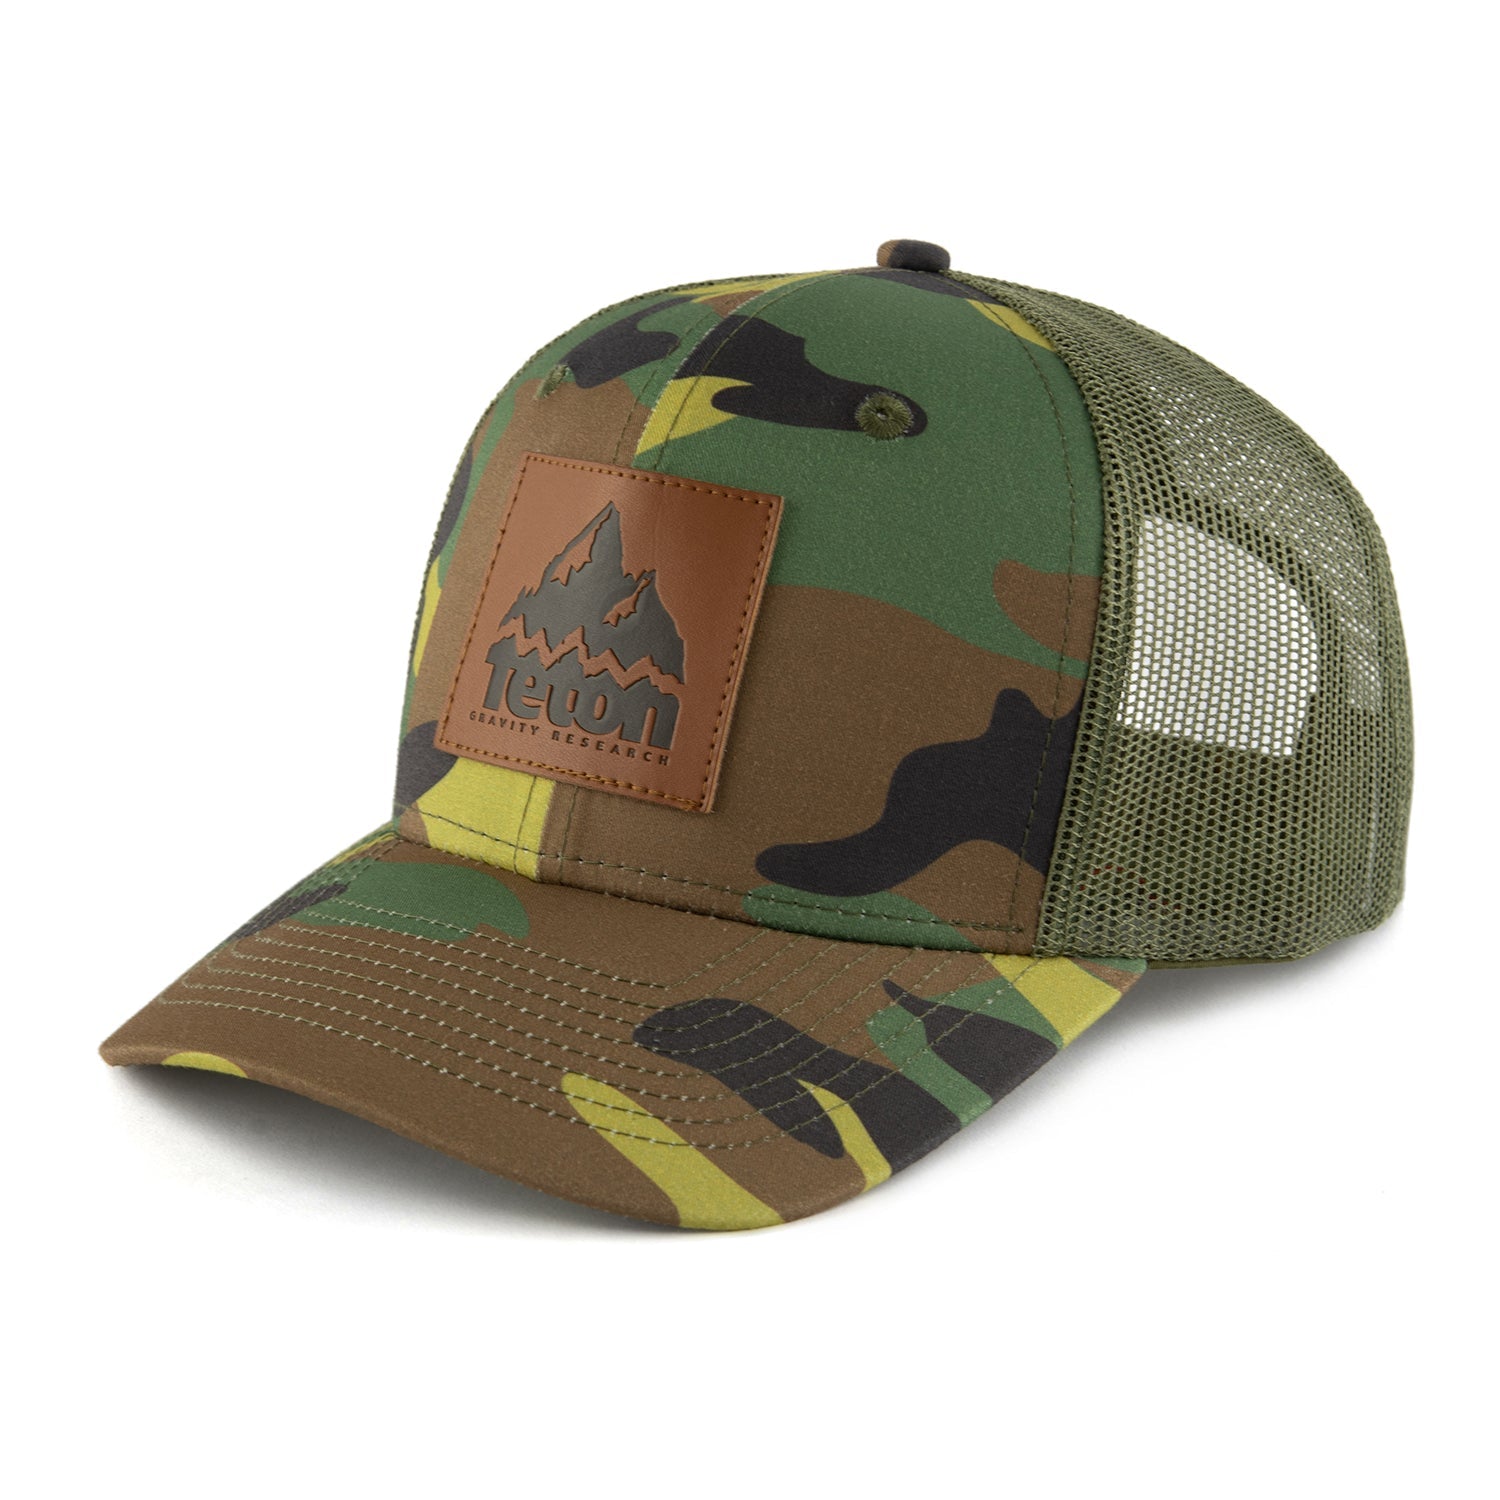 Expedition Trucker Hat - Teton Gravity Research